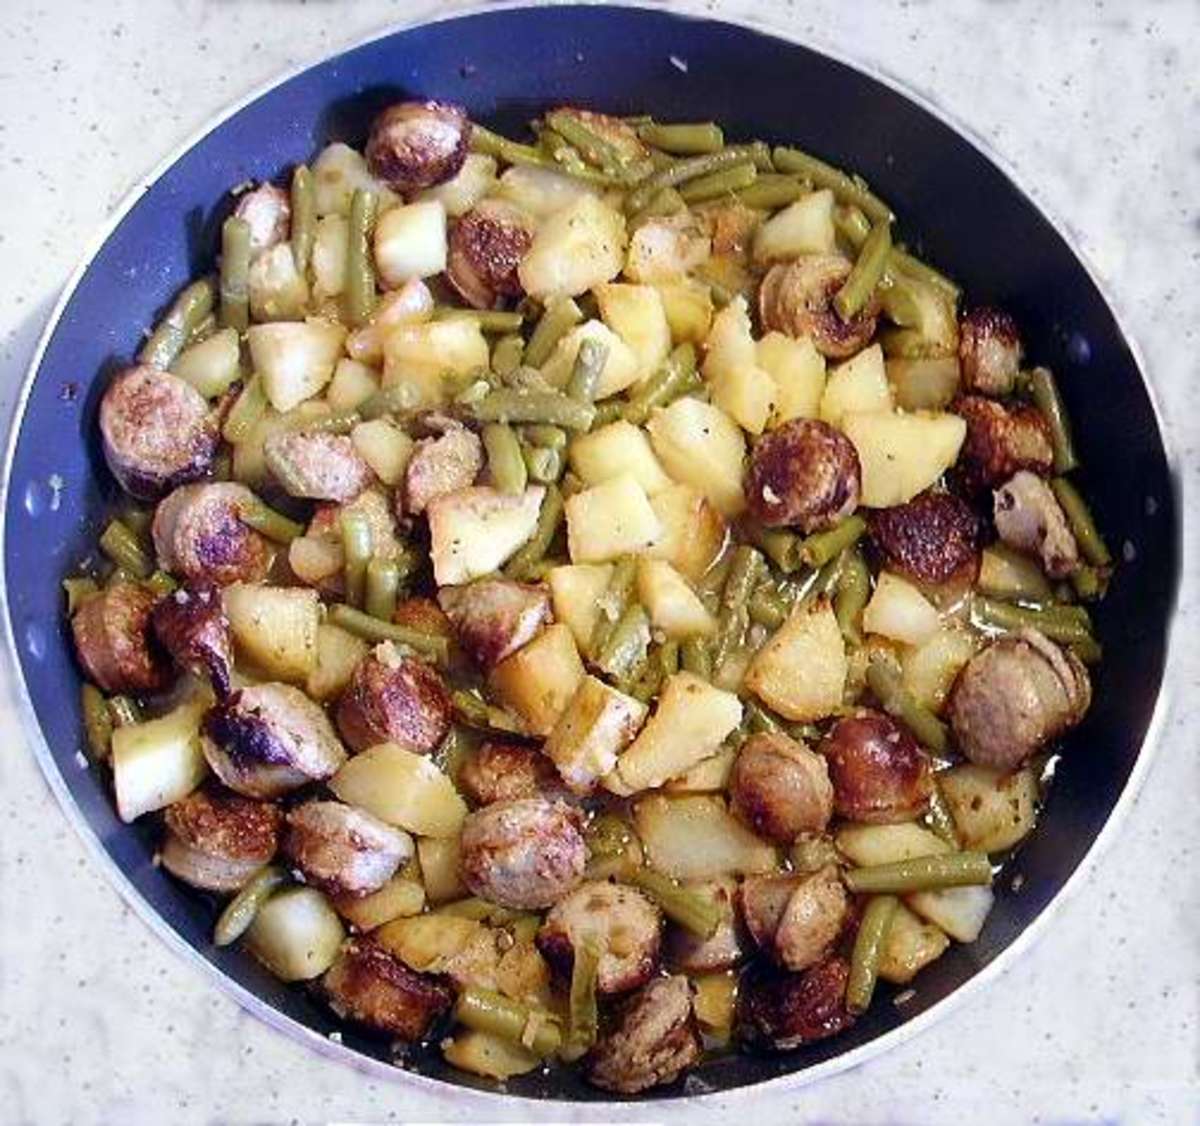 Great Fall/Winter Recipe: Brats or Sausage with Potato, Onion & Green Beans...Comfort Food